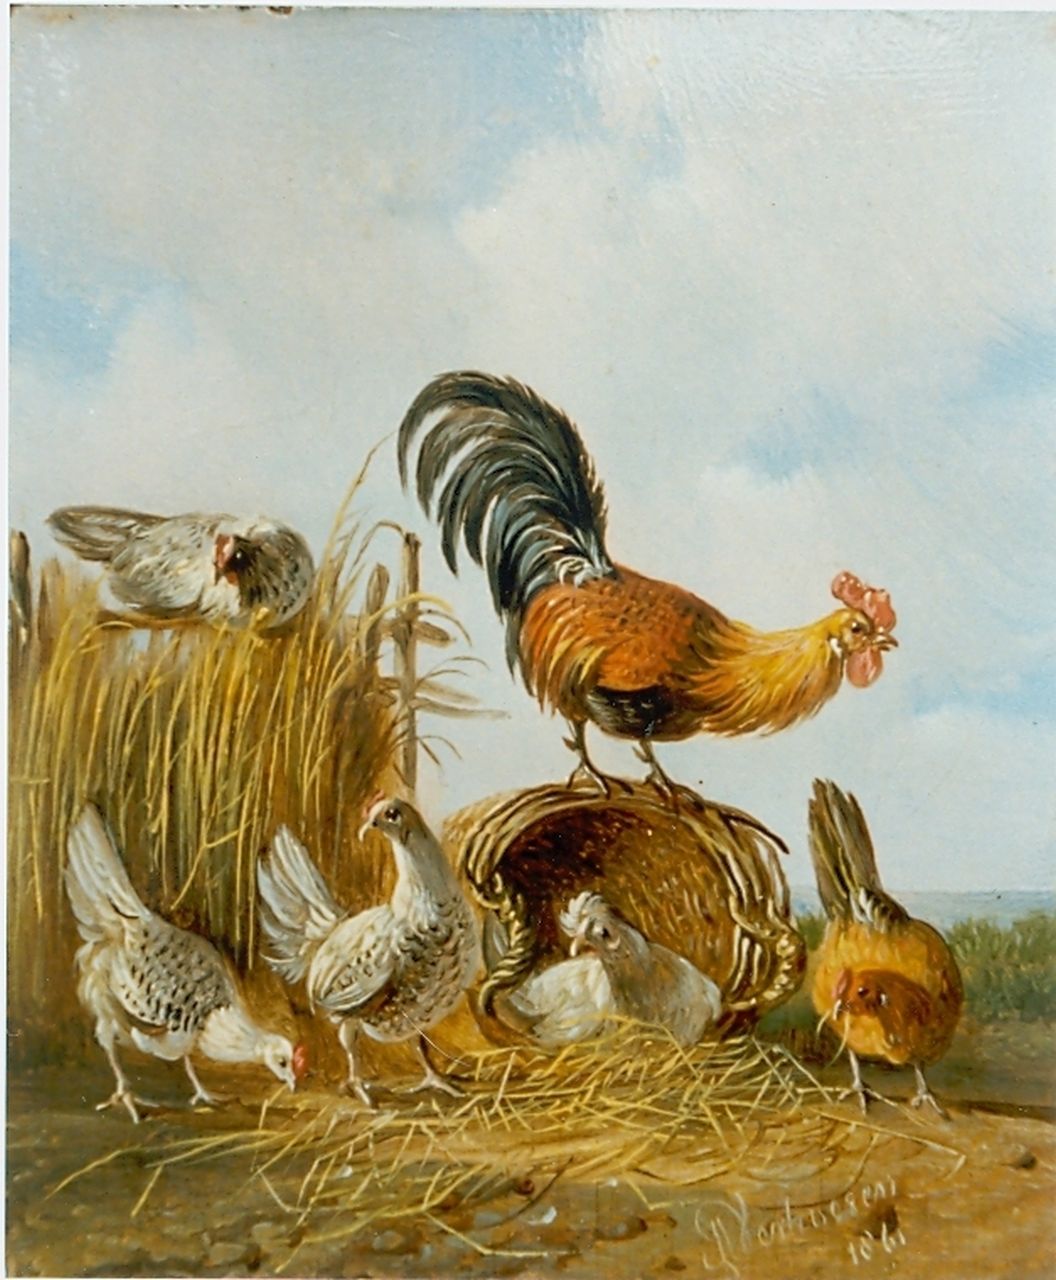 Verhoesen A.  | Albertus Verhoesen, A rooster and hens, oil on panel 12.5 x 10.2 cm, signed l.r. and dated 1861